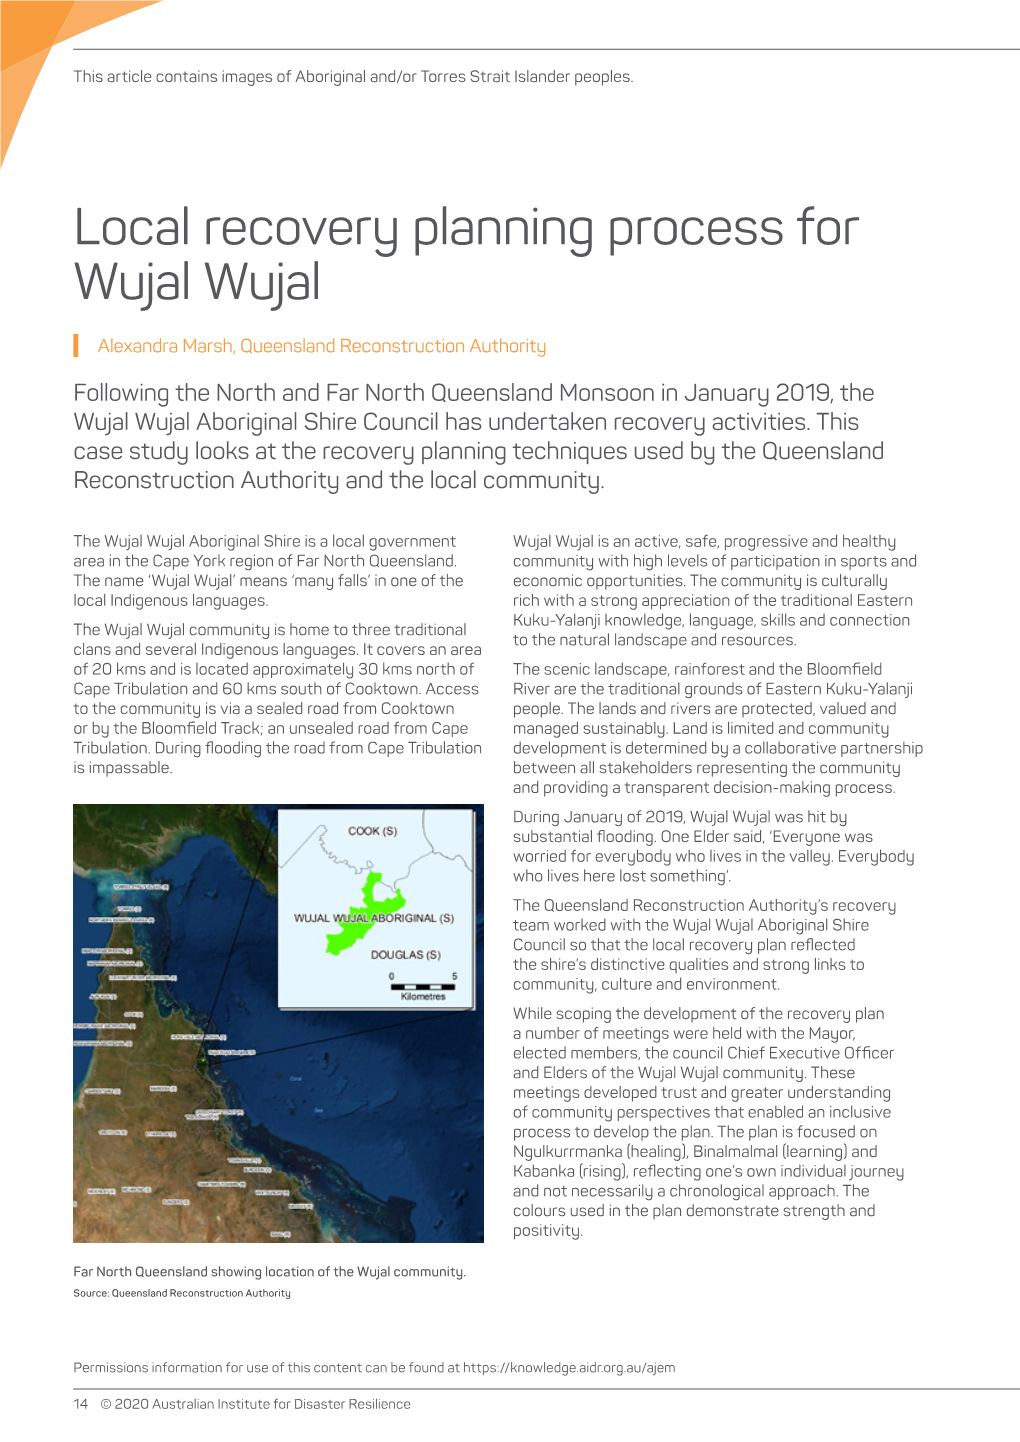 Local Recovery Planning Process for Wujal Wujal